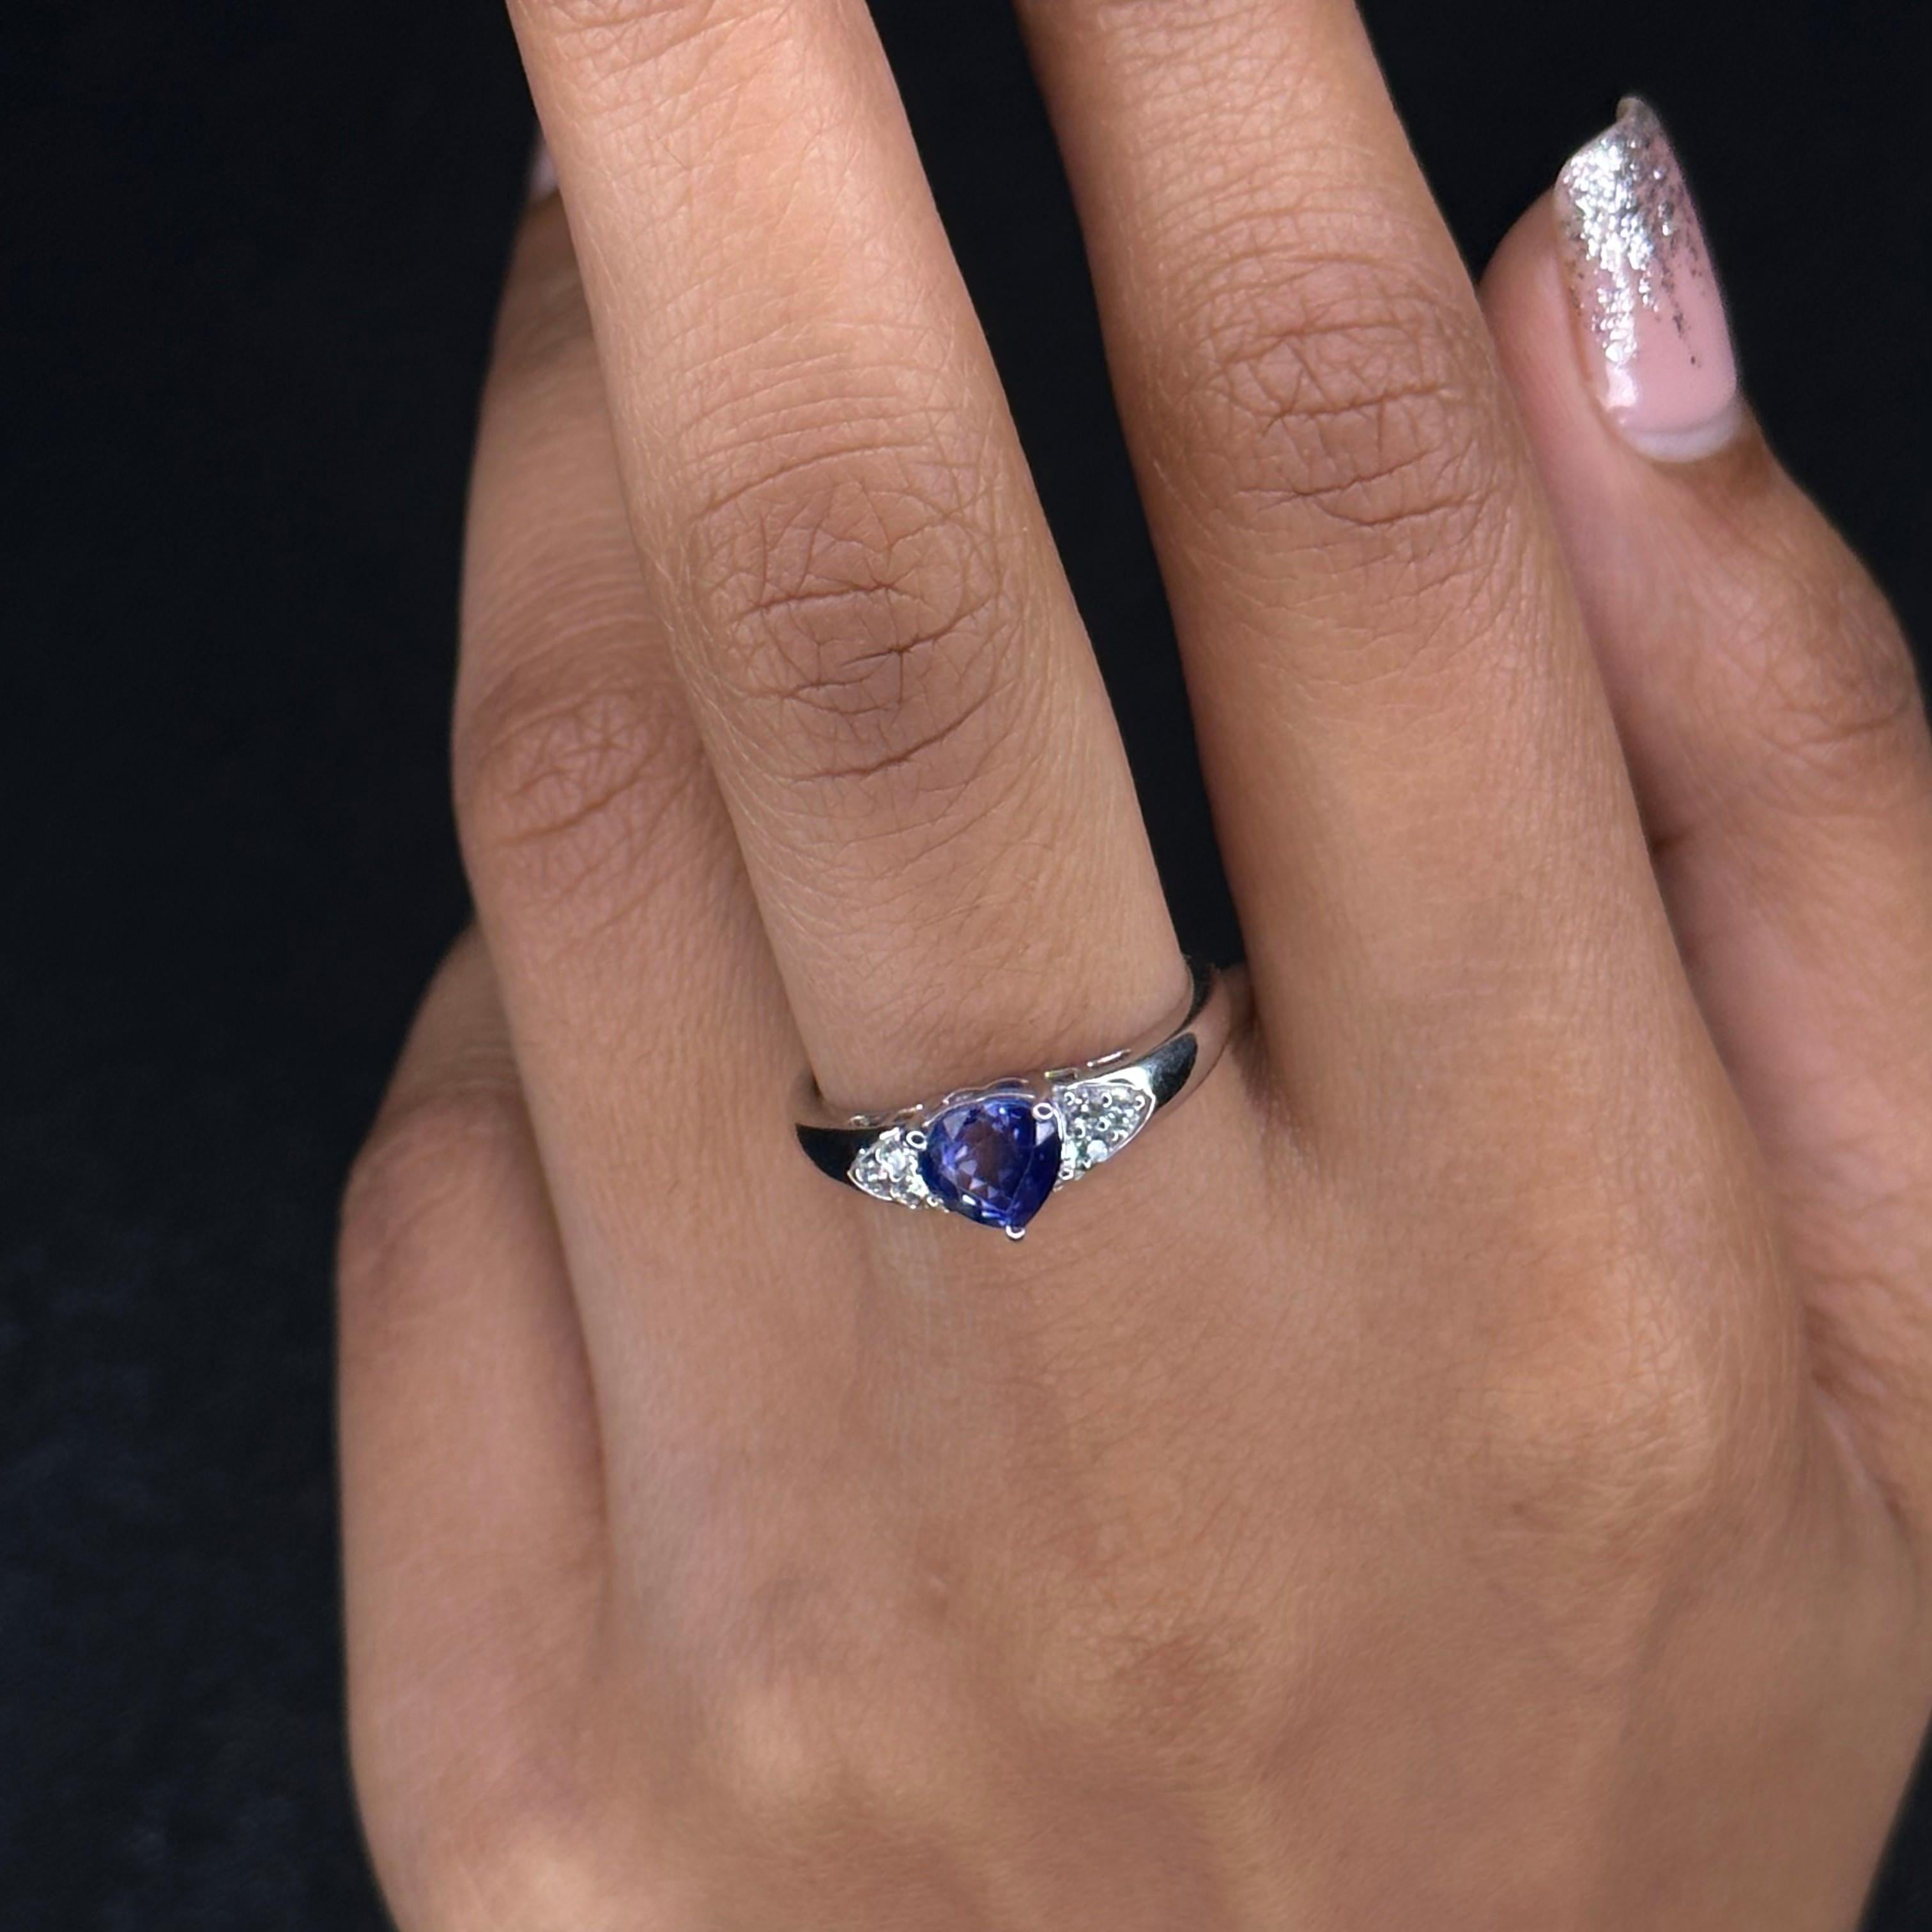 For Sale:  14k White Gold Trillion Cut Sapphire Birthstone Engagement Ring with Diamonds 7